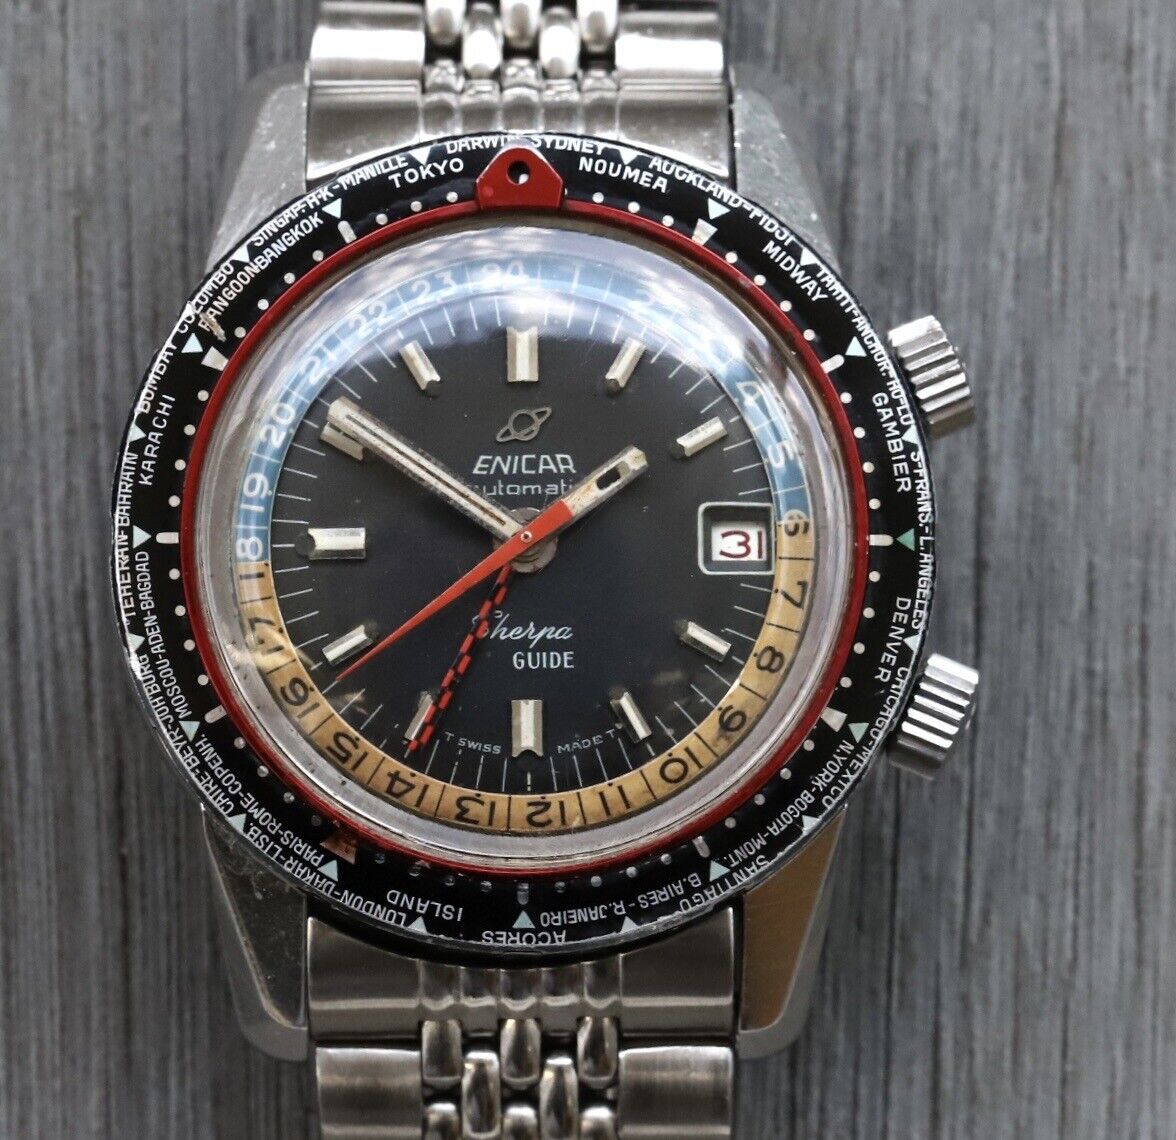 Enicar Sherpa Guide 600 GMT World-Time 148-35-01A